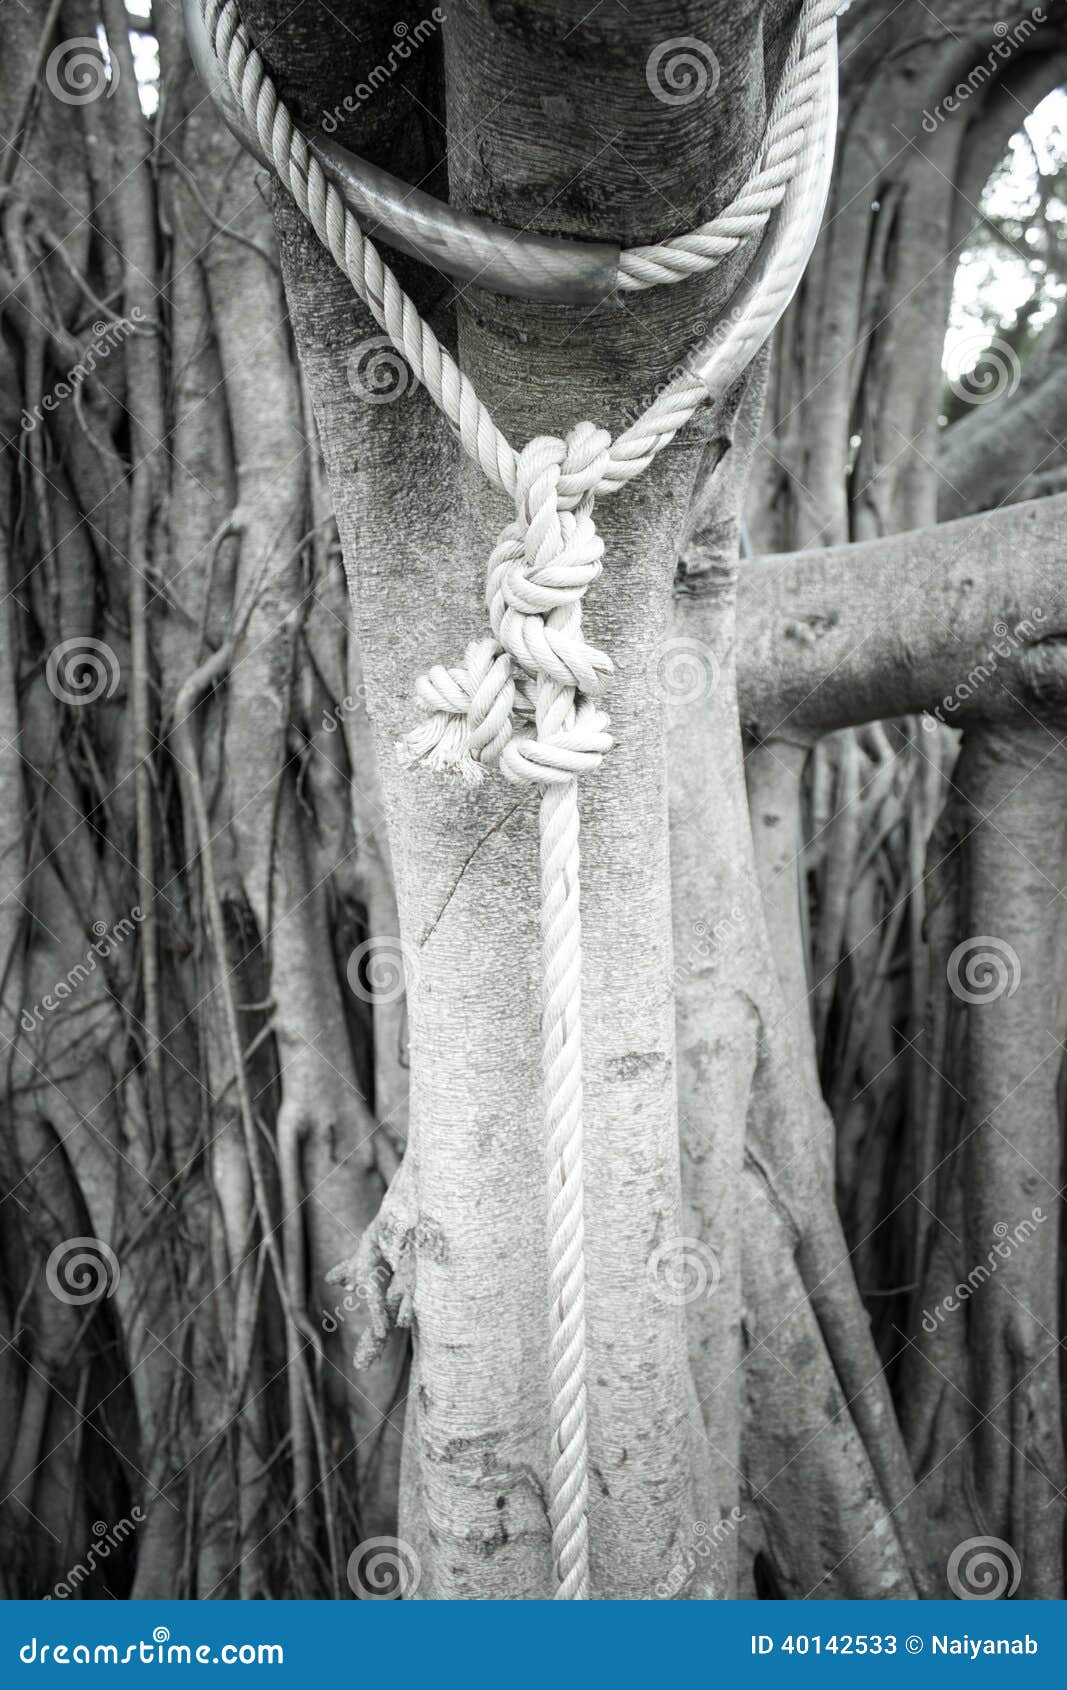 Rope tied to a big tree stock image. Image of trunk, connection